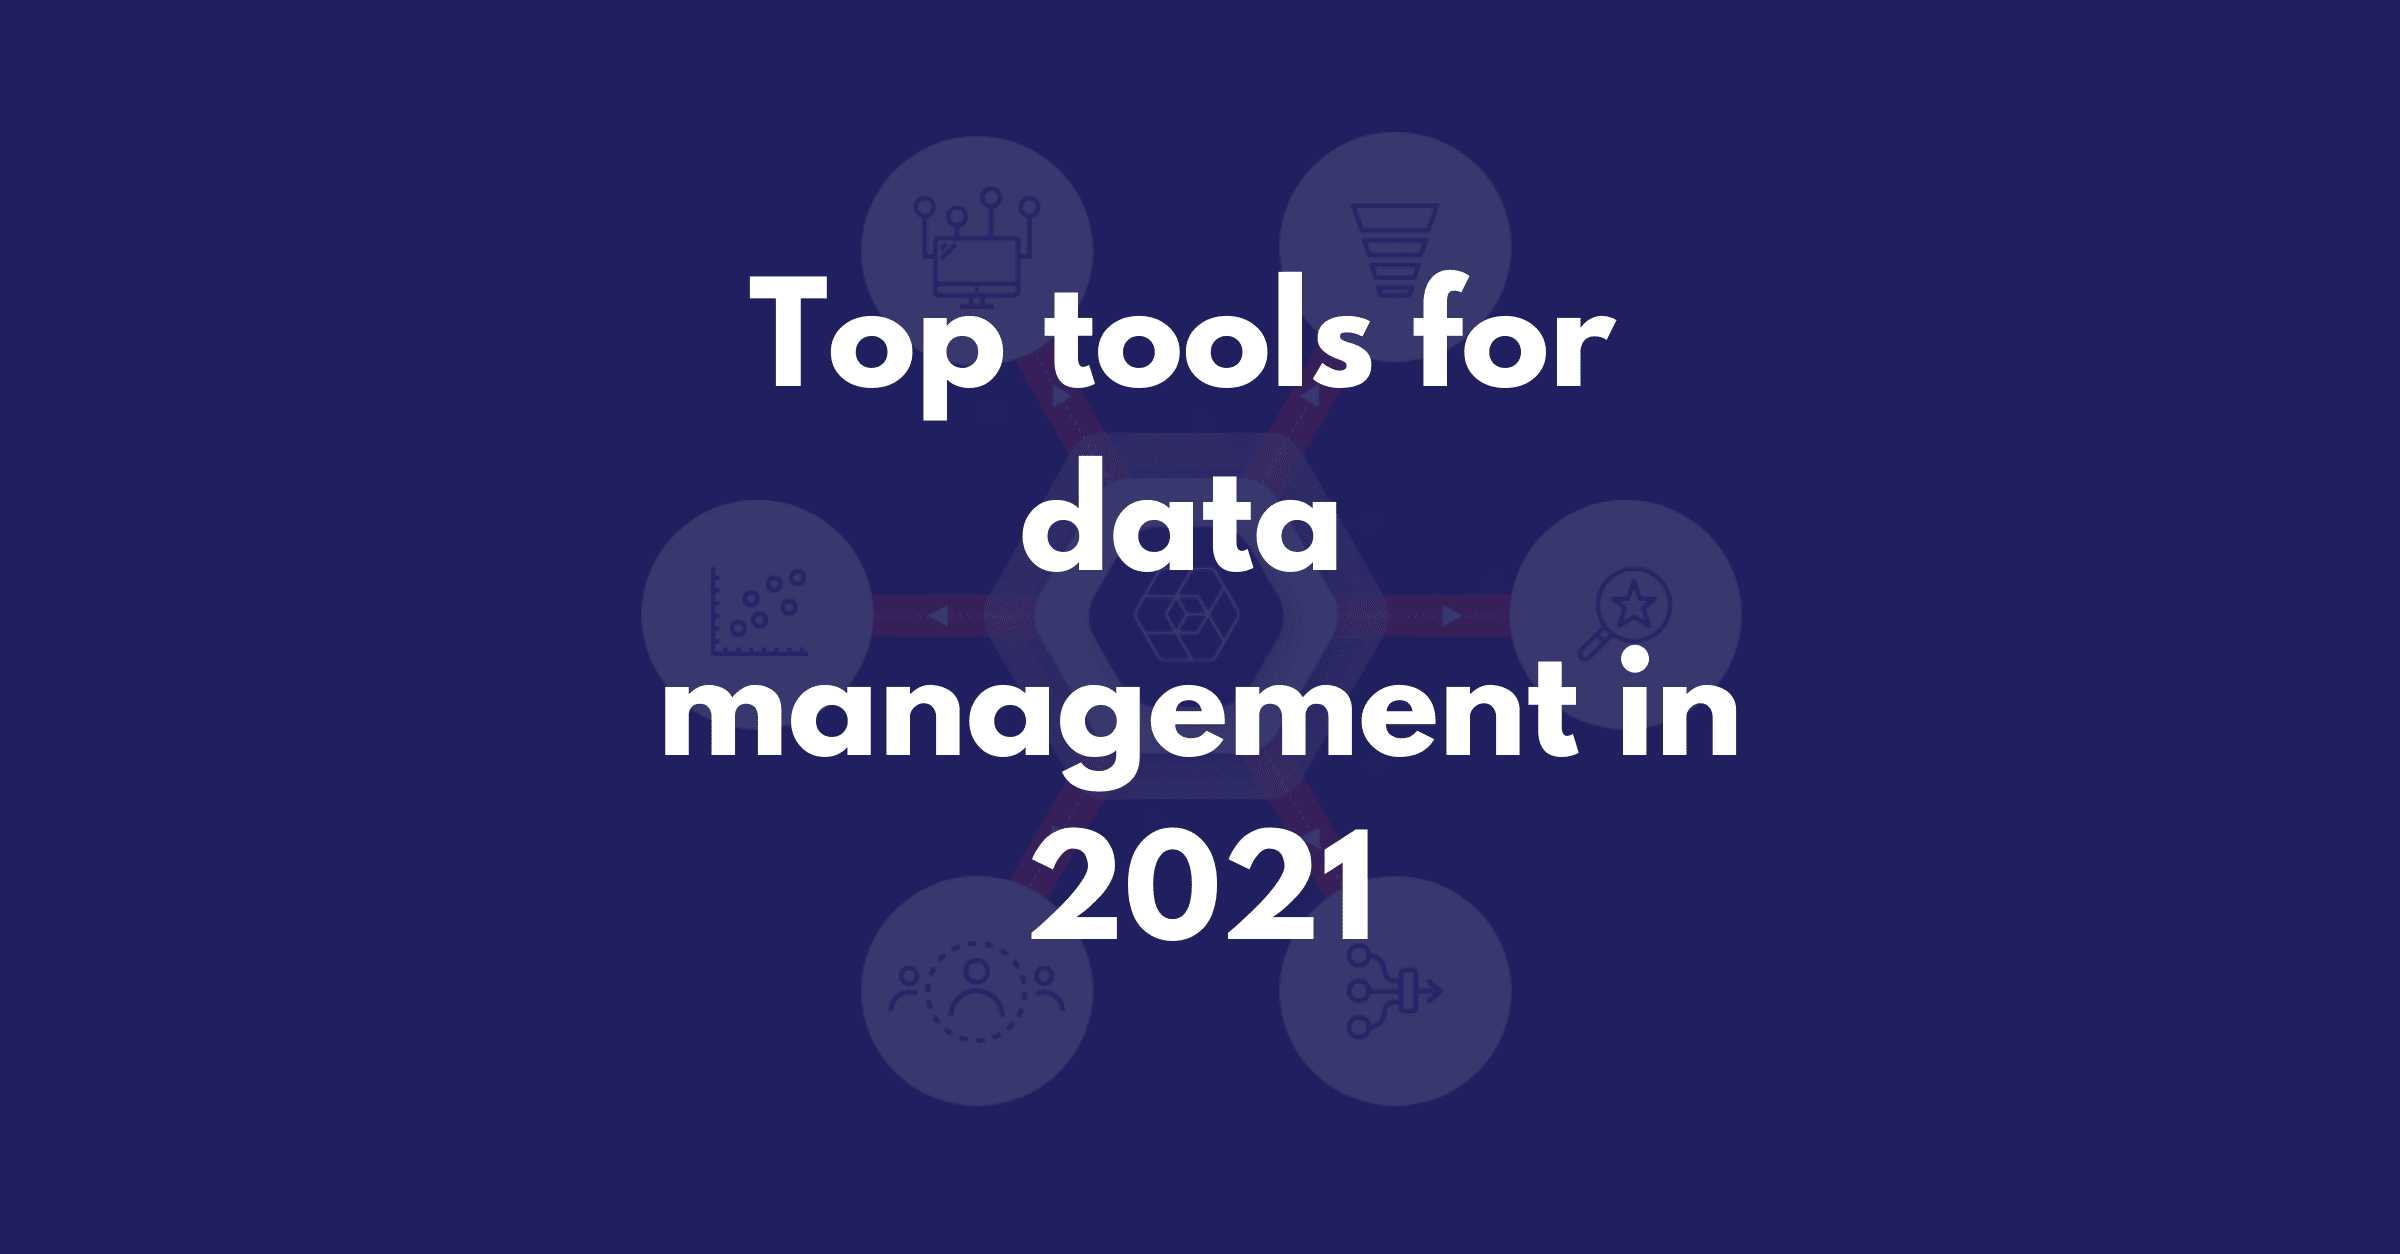 The 18 best data management tools for your organization